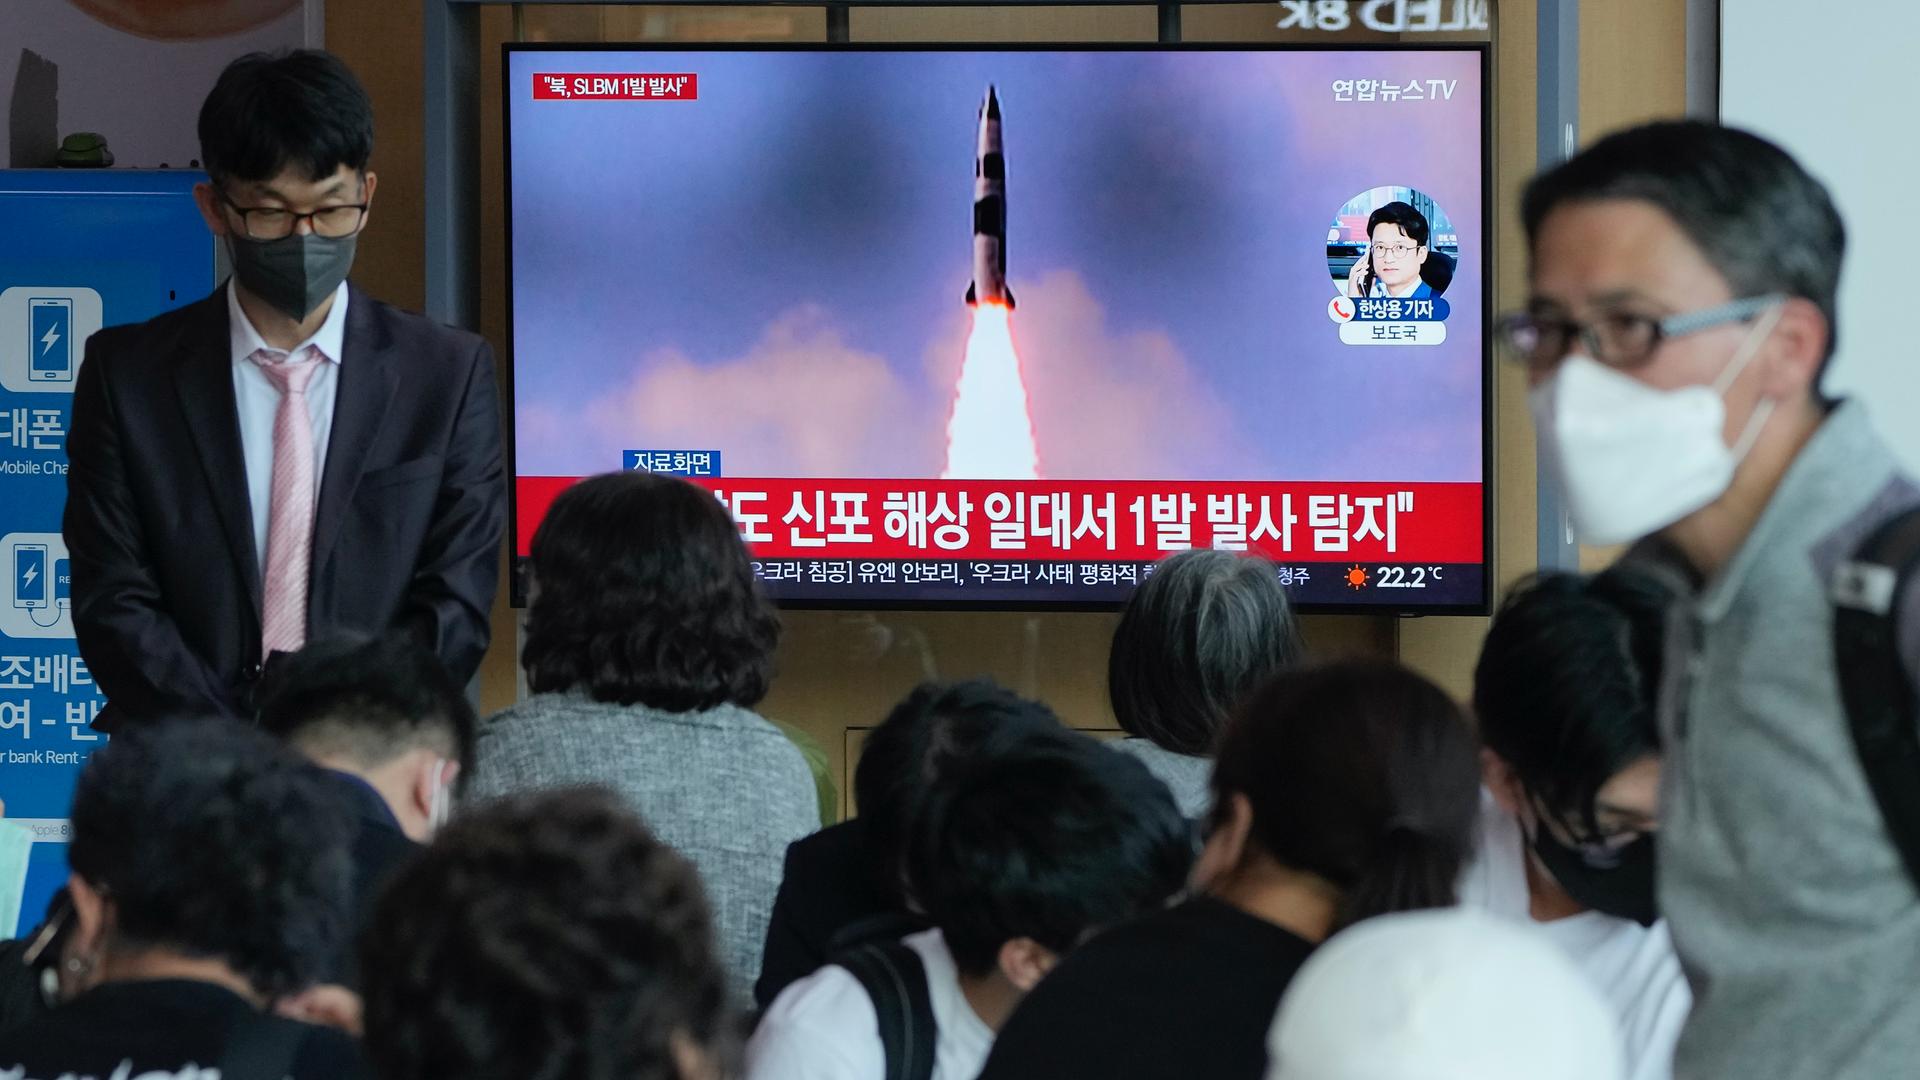 People watch a TV showing a file image of North Korea's missile launch during a news program at the Seoul Railway Station in Seoul, South Korea, May 7, 2022.